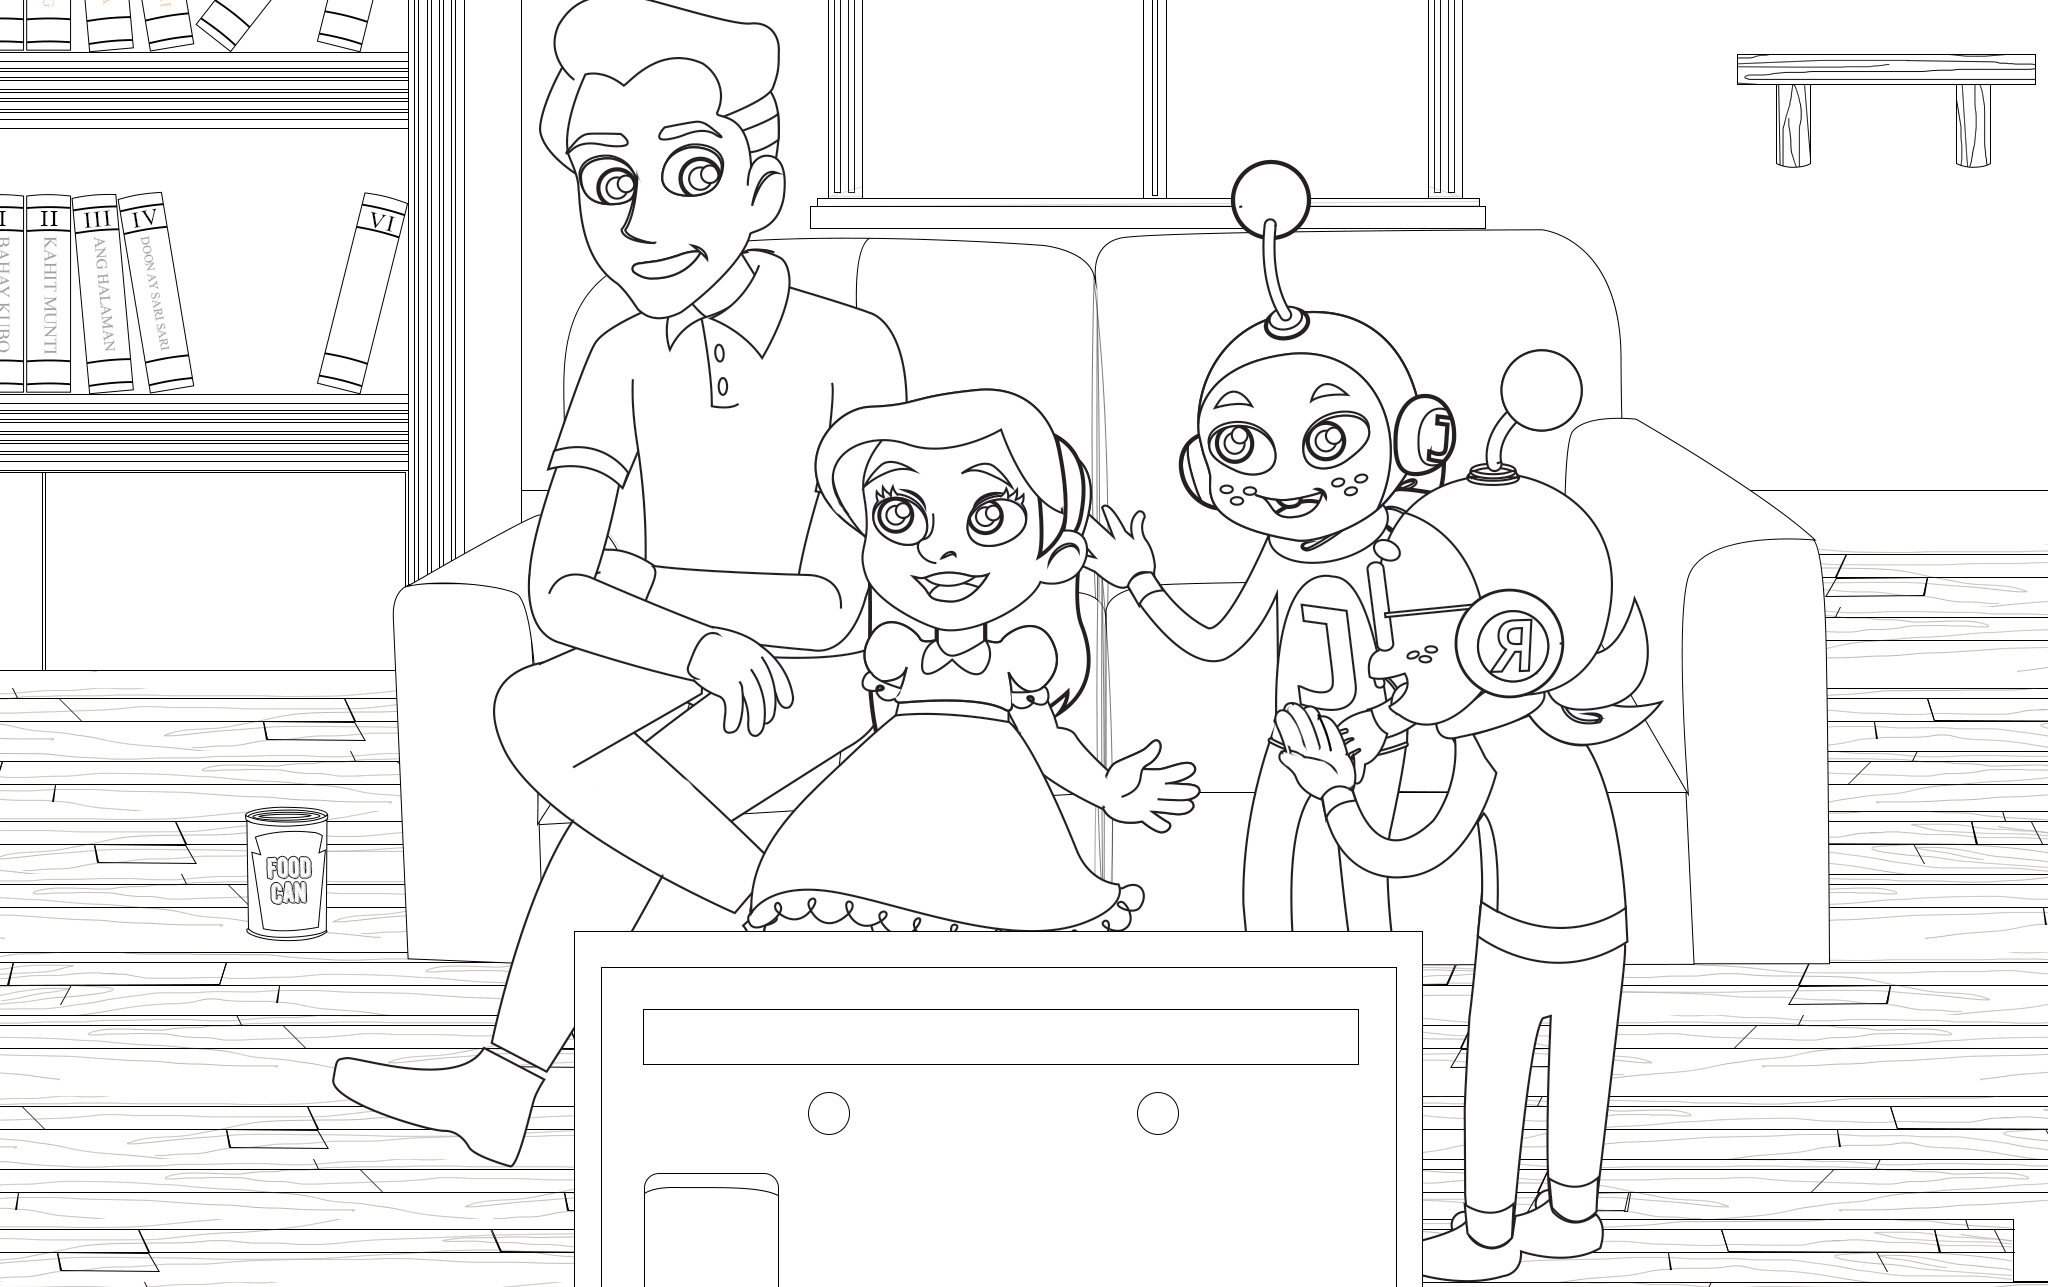 Huntington's Disease Youth Organization - Coloring Pages